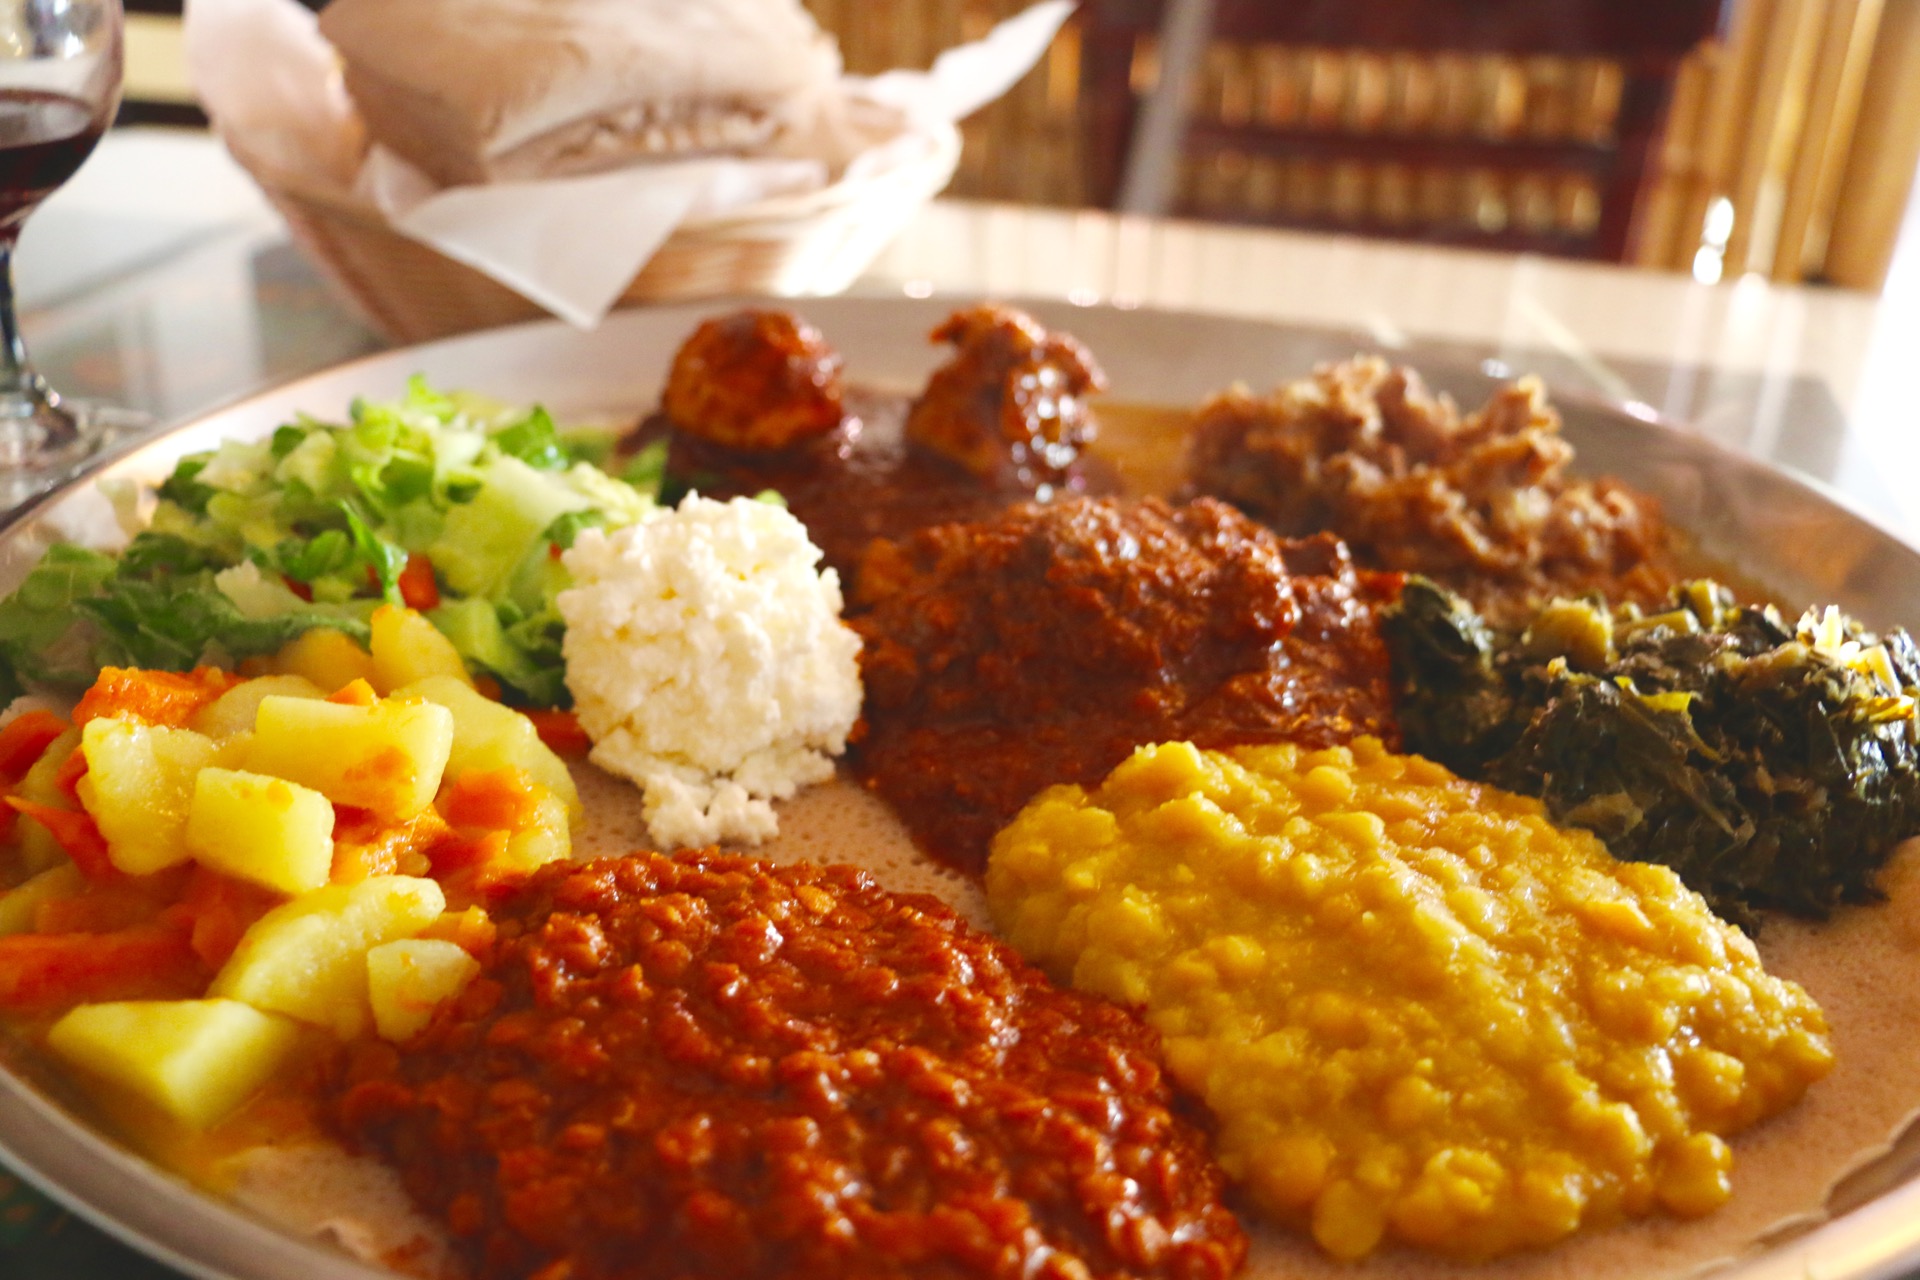 Addis' meat and vegetable combination plates served on one platter.